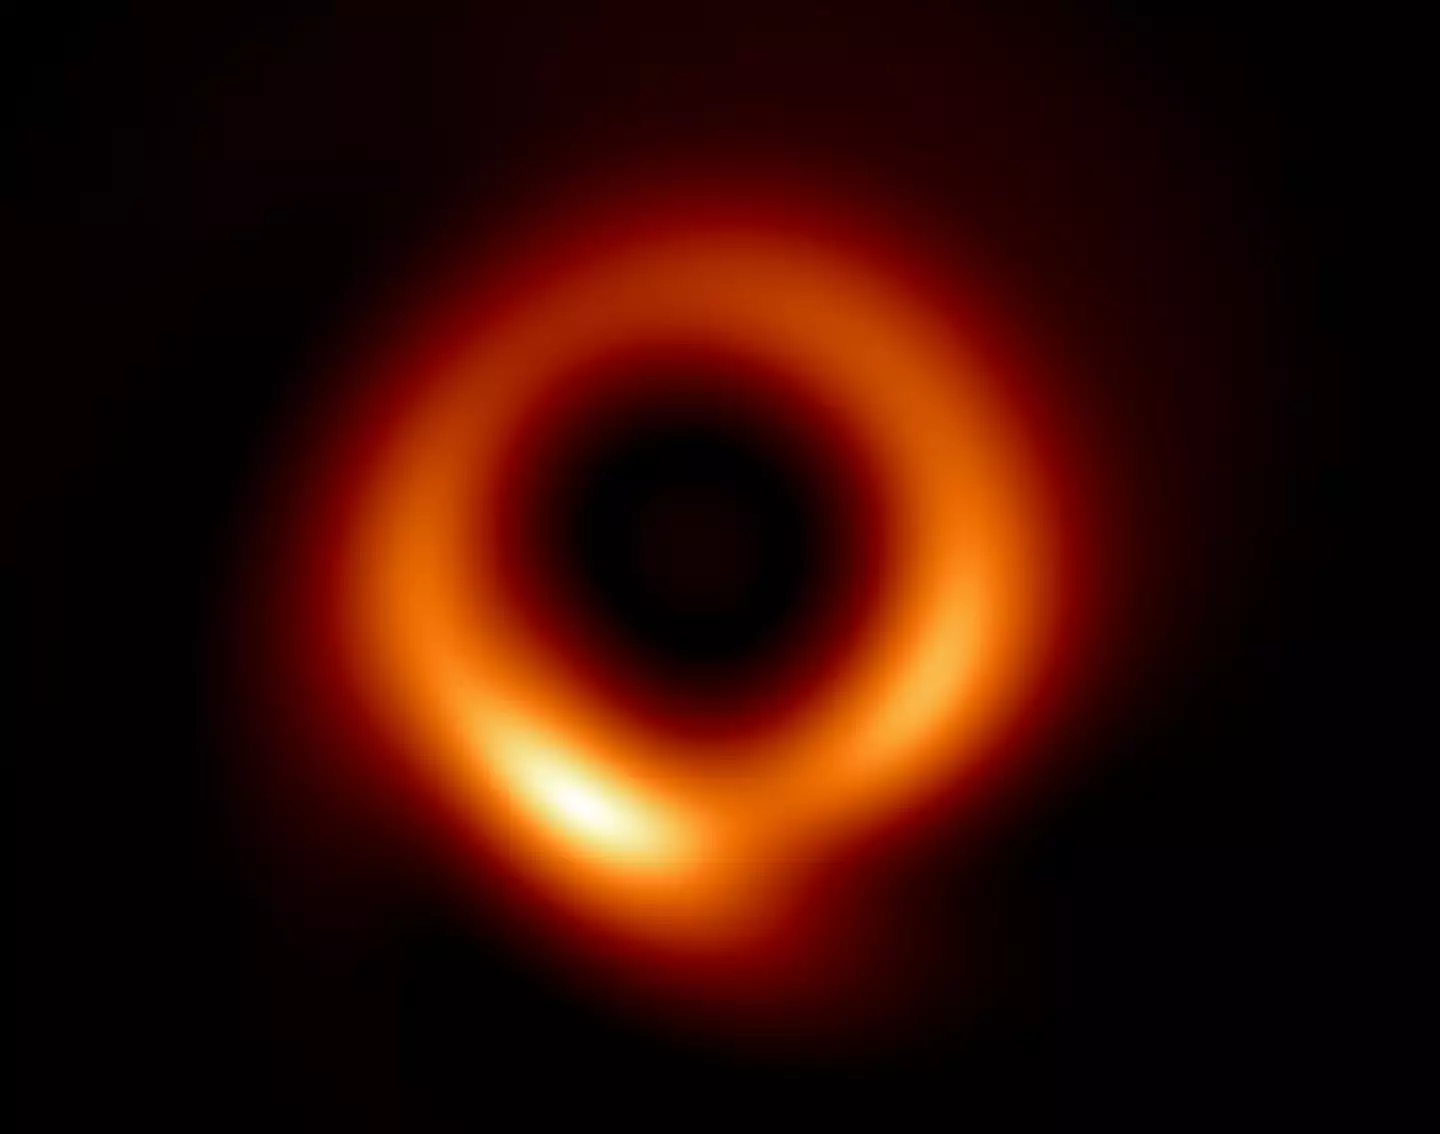 The M87 supermassive black hole generated from the PRIMO algorithm using 2017 EHT data.